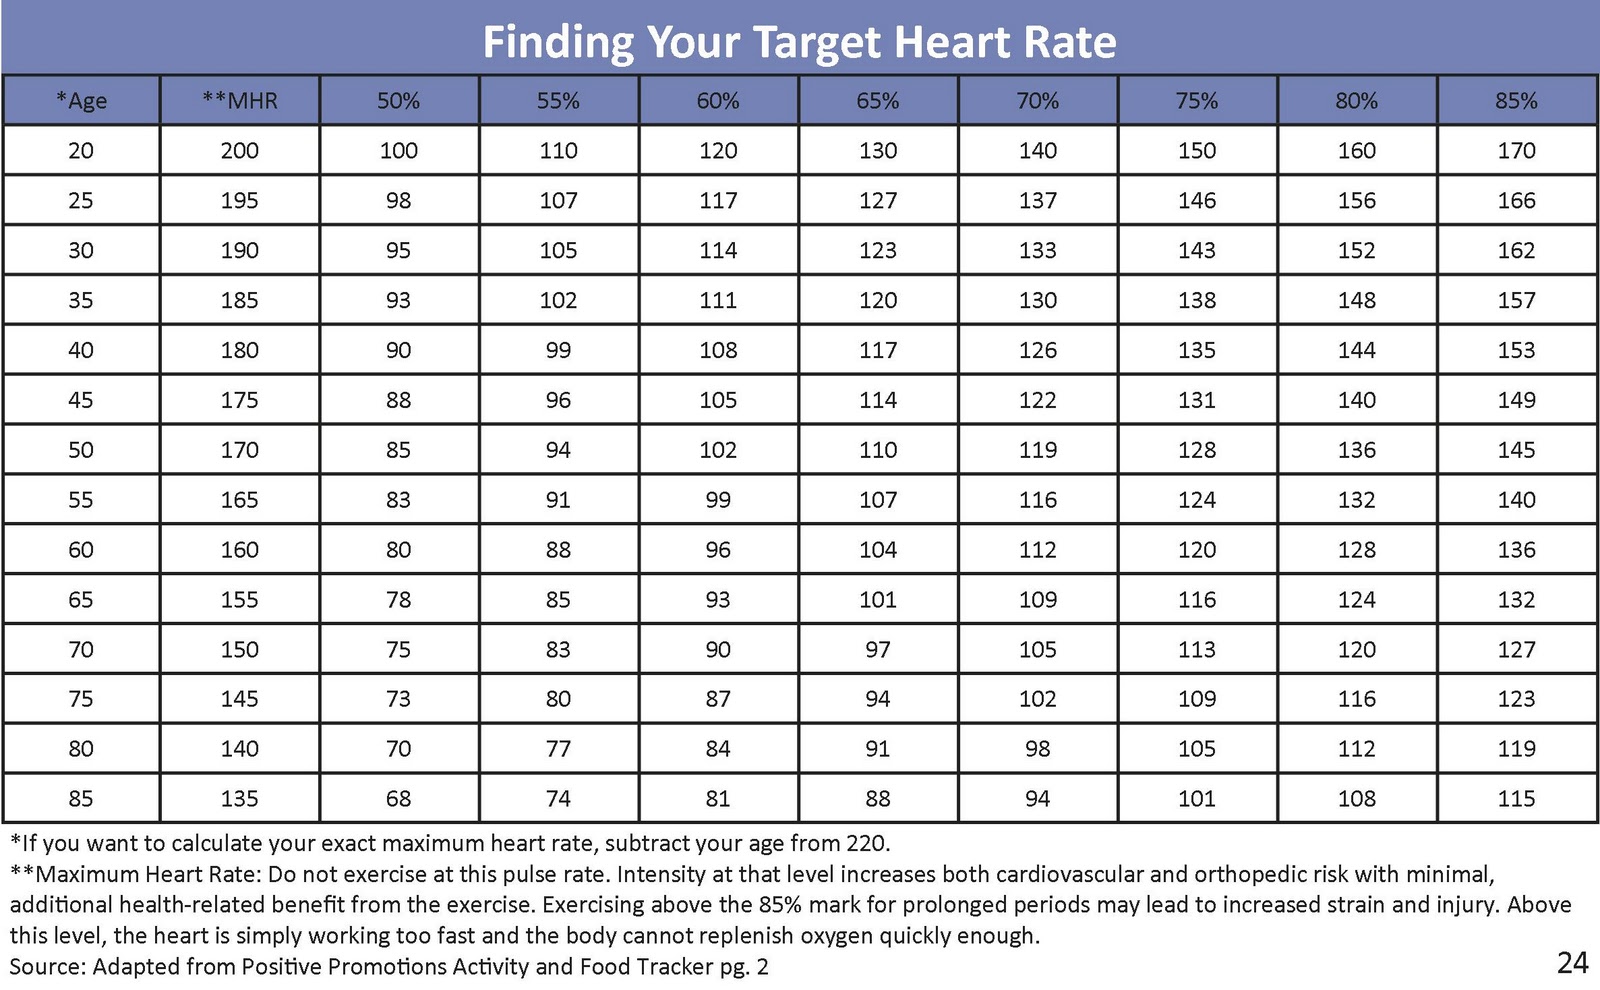 Exercise Target Heart Rate